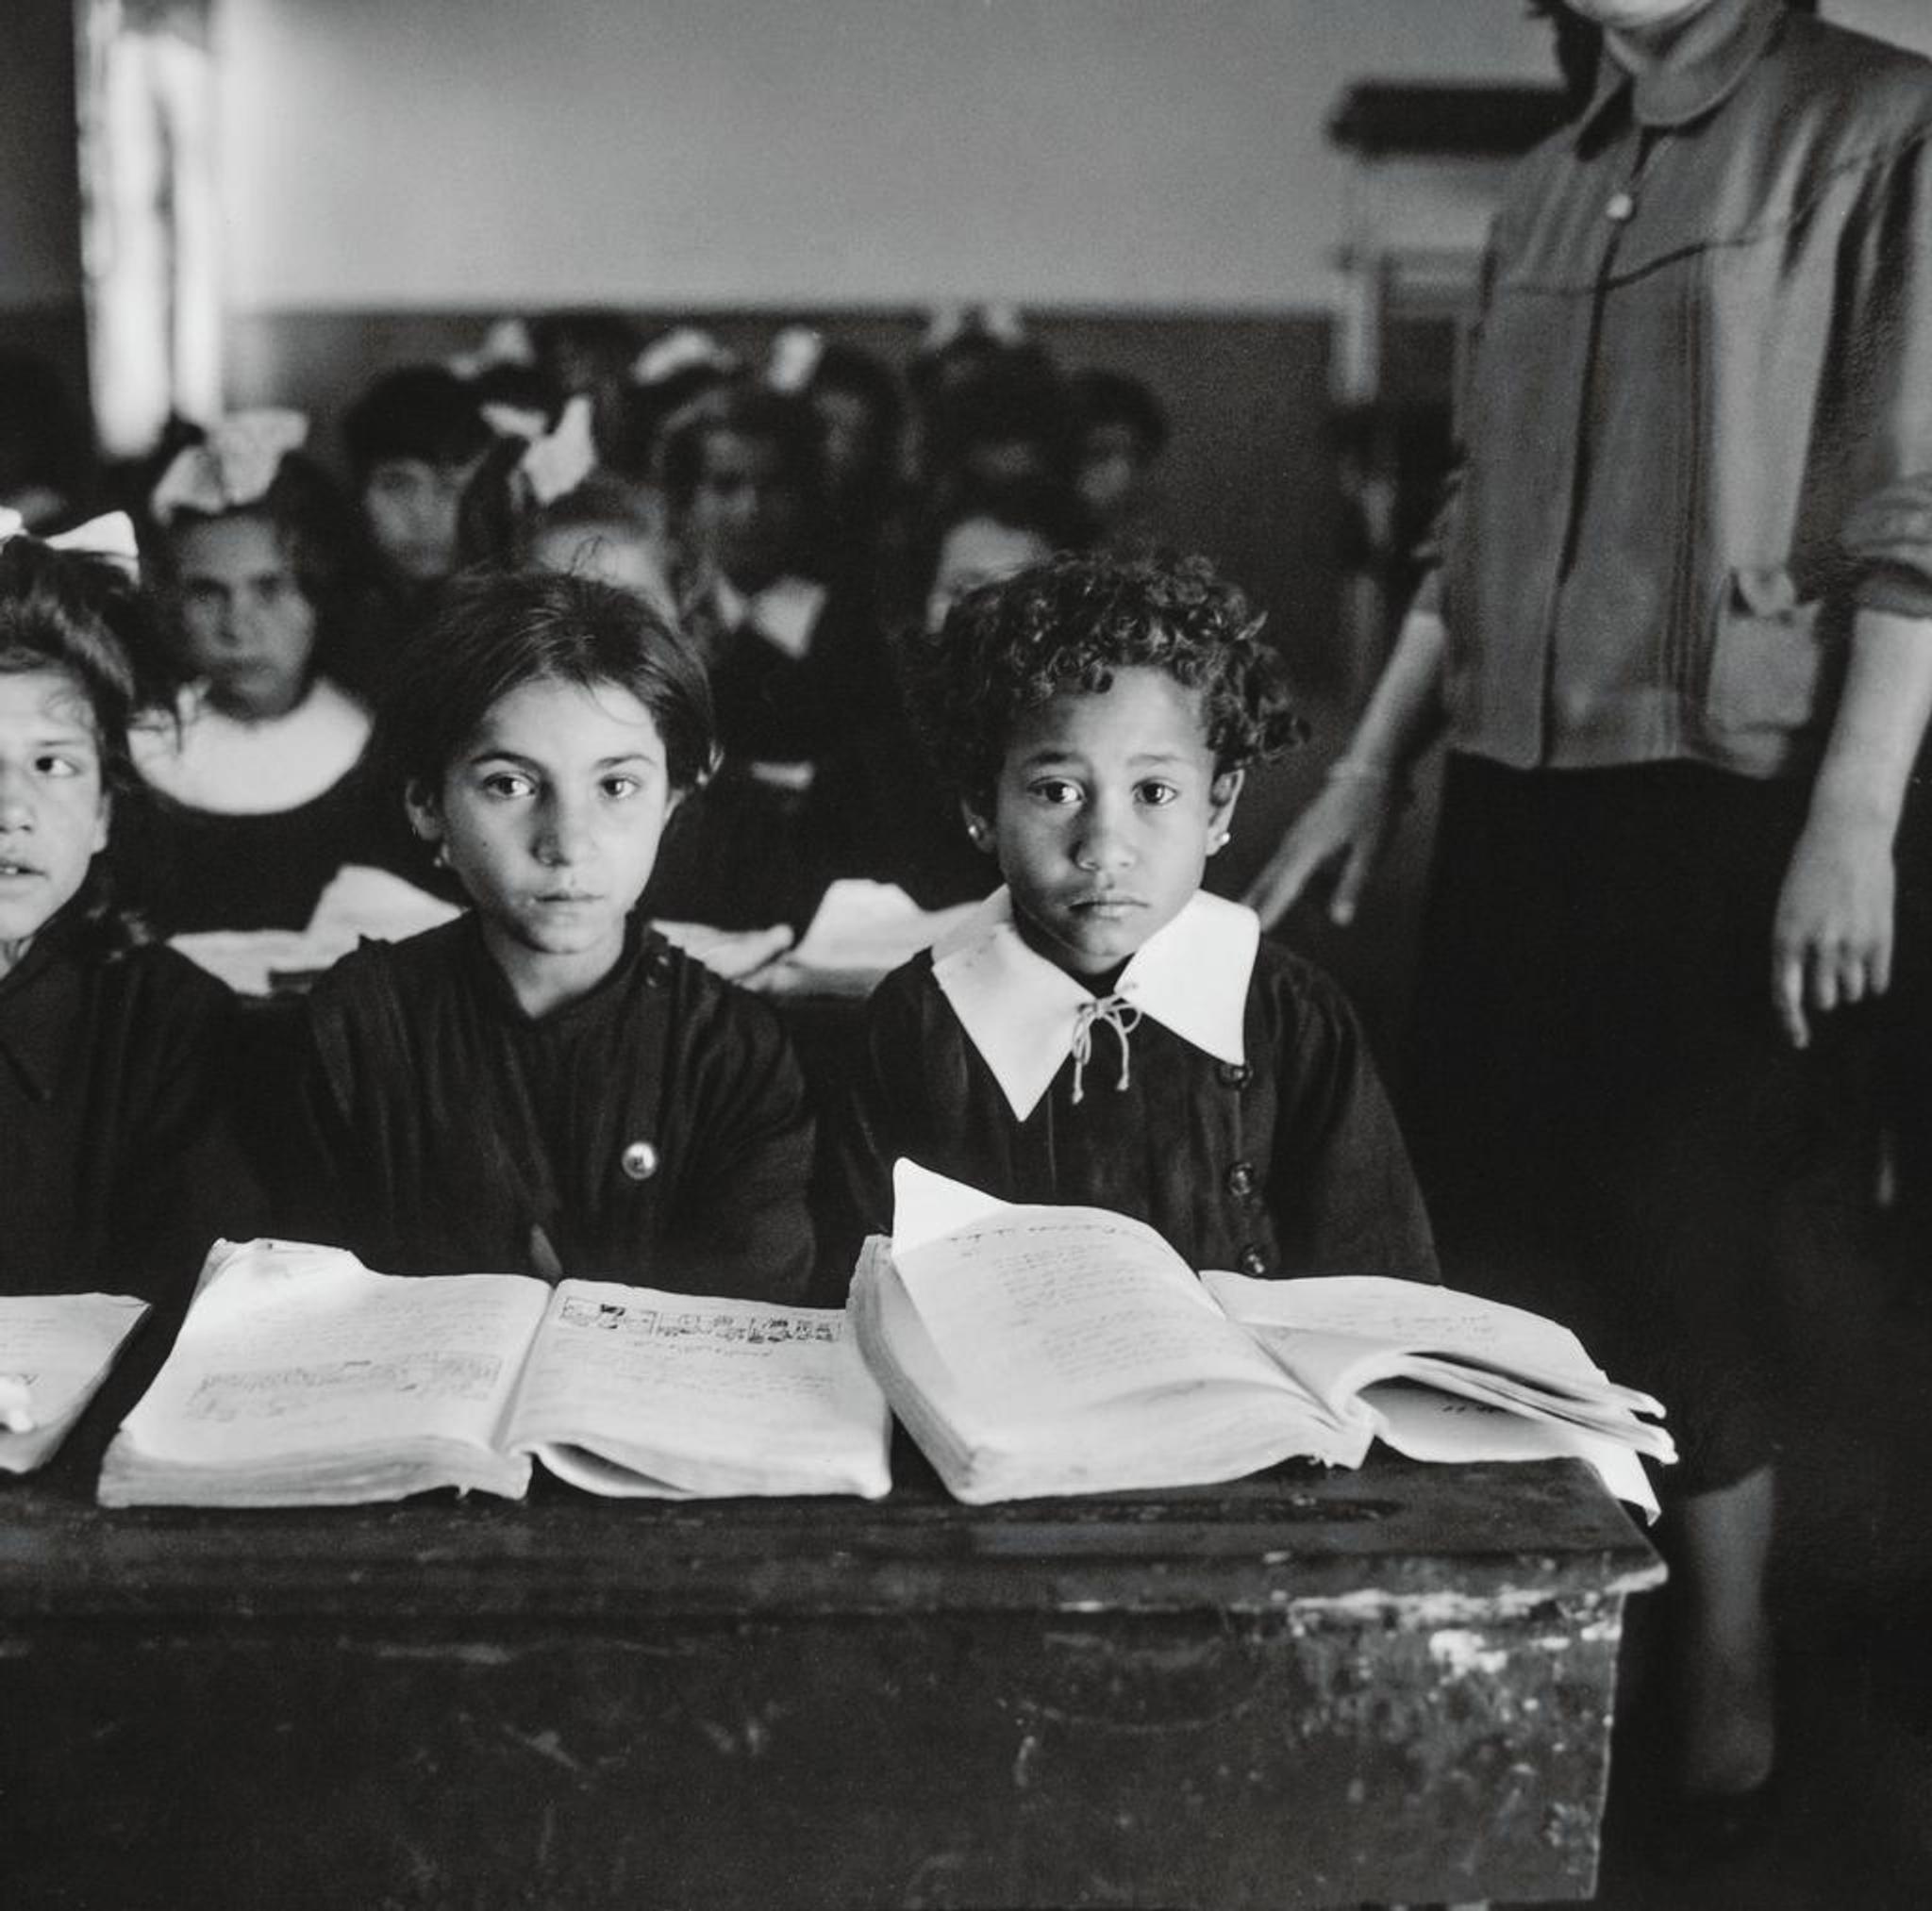 A group of girls in a classroom, looking in the camera with serious faces. On the desks in front of them are open books.